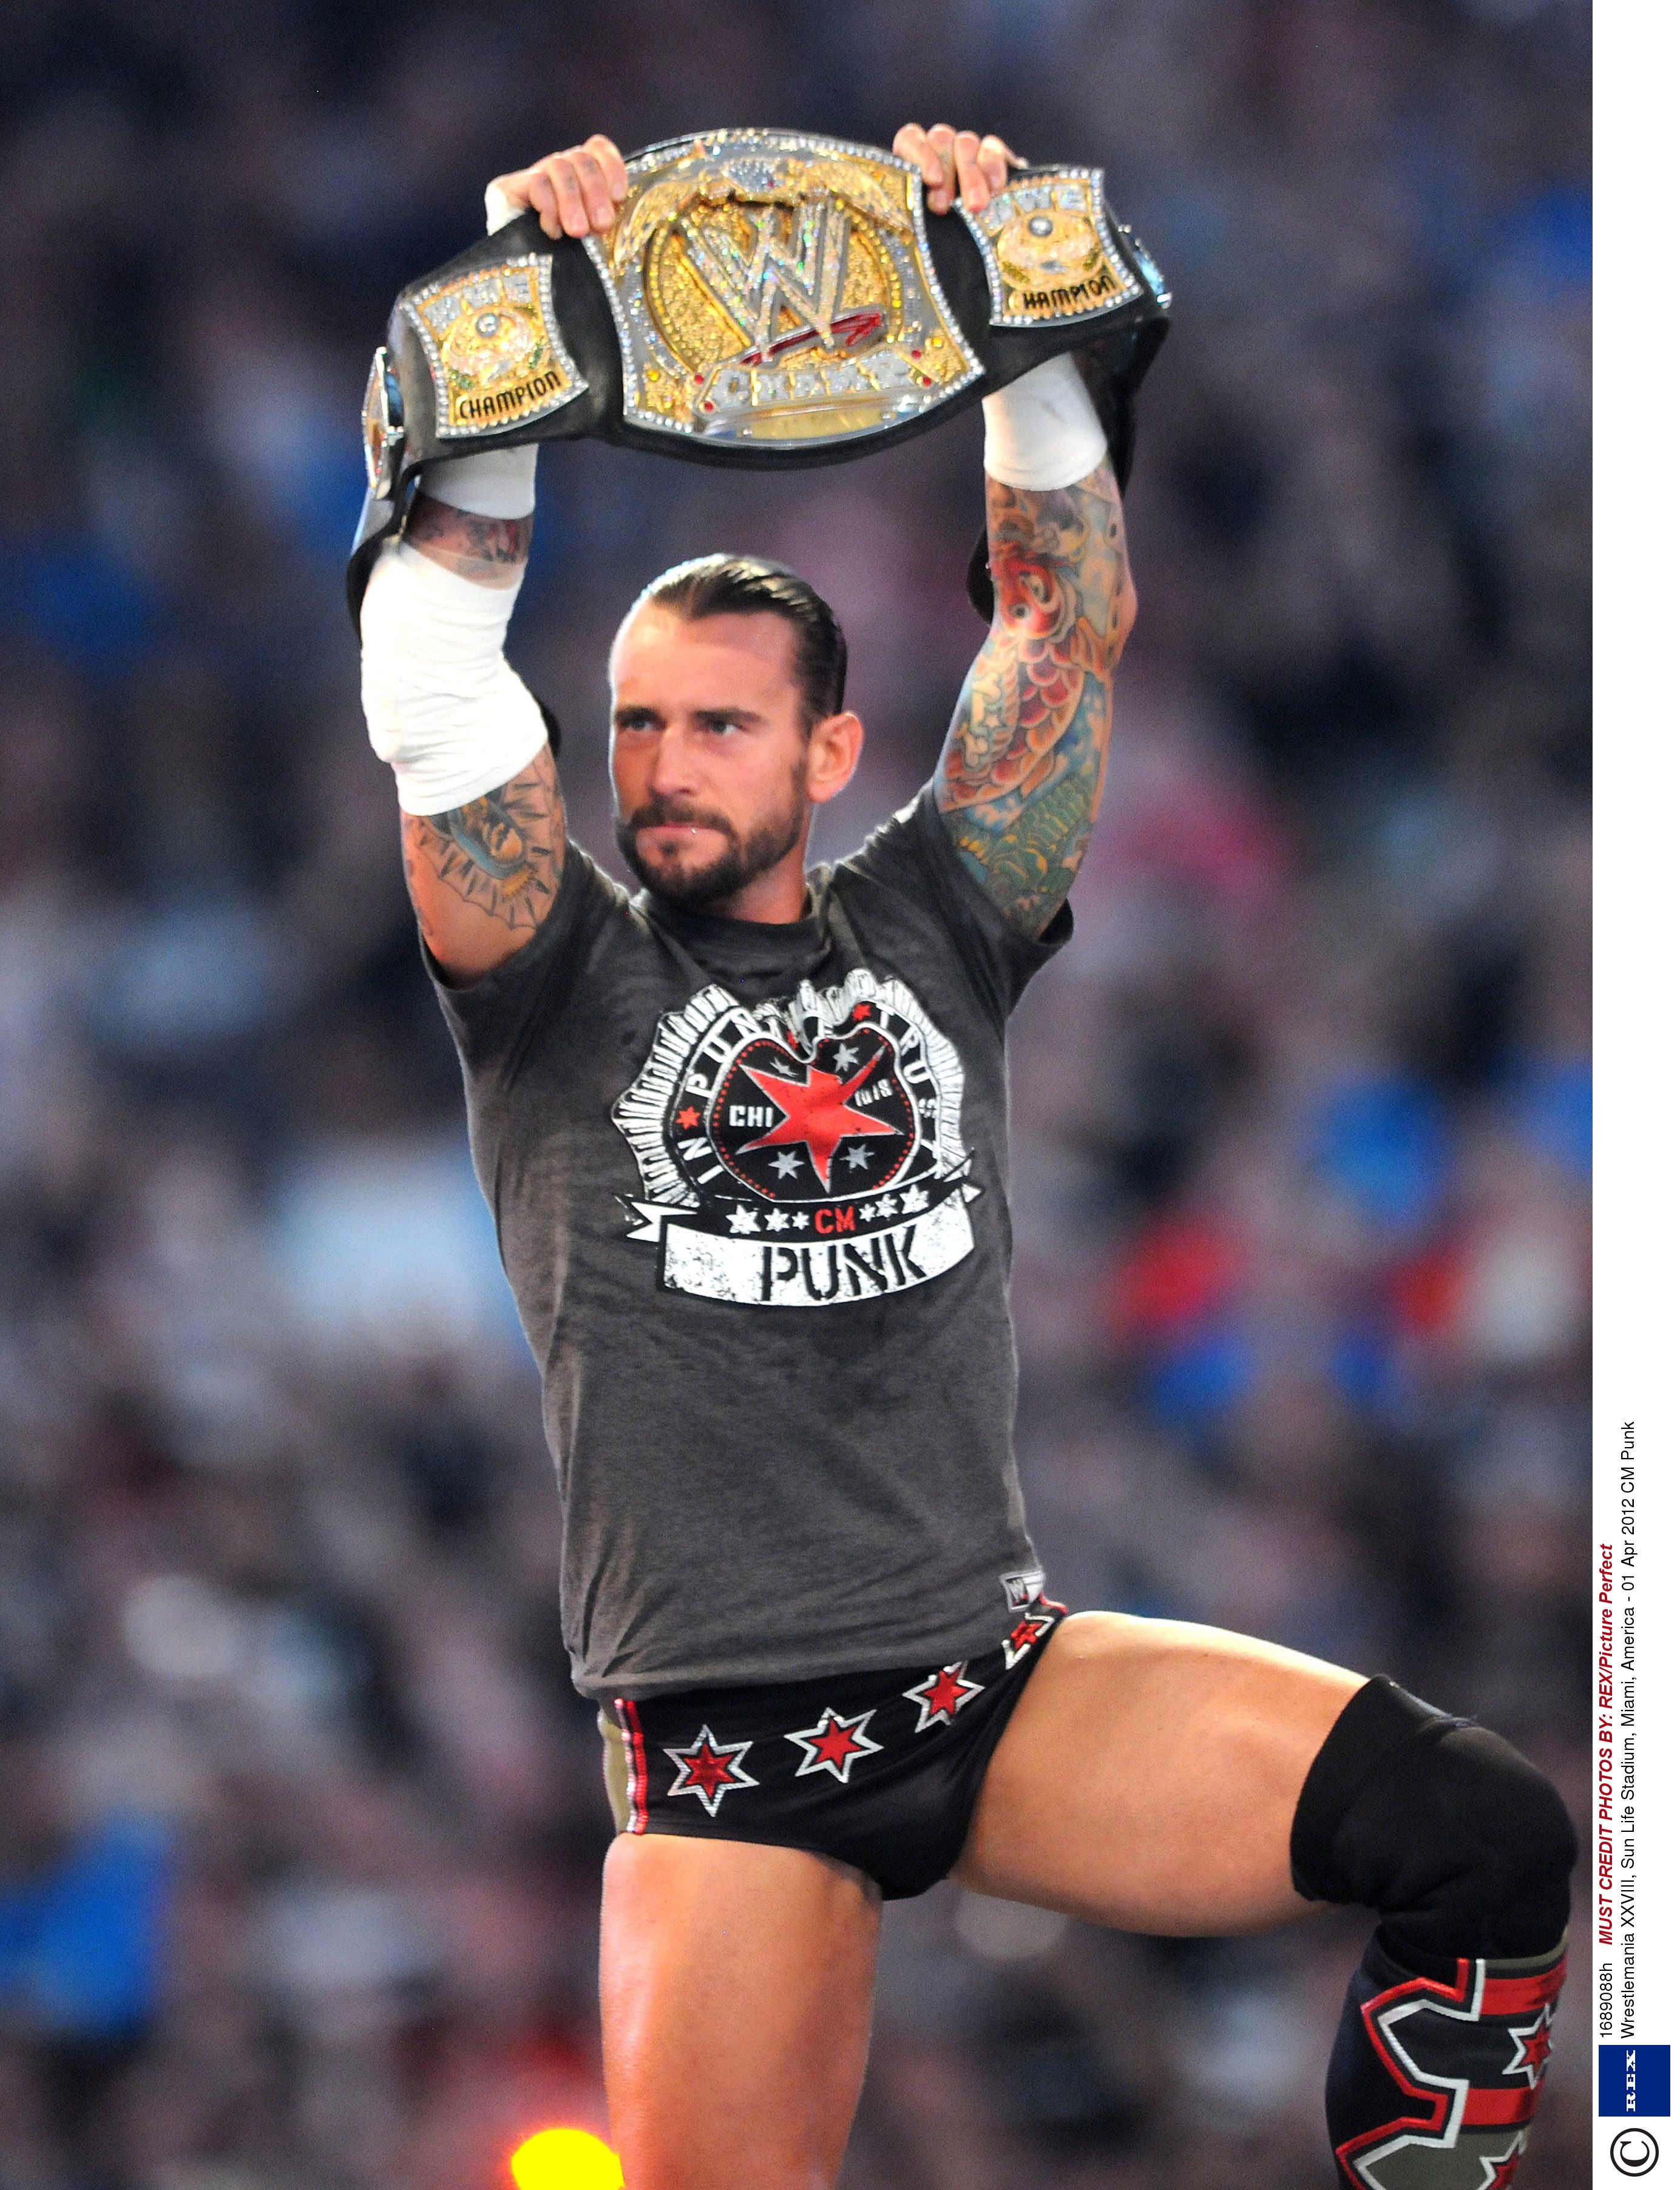 Former WWE Champion CM Punk postpones his UFC debut to have back surgery